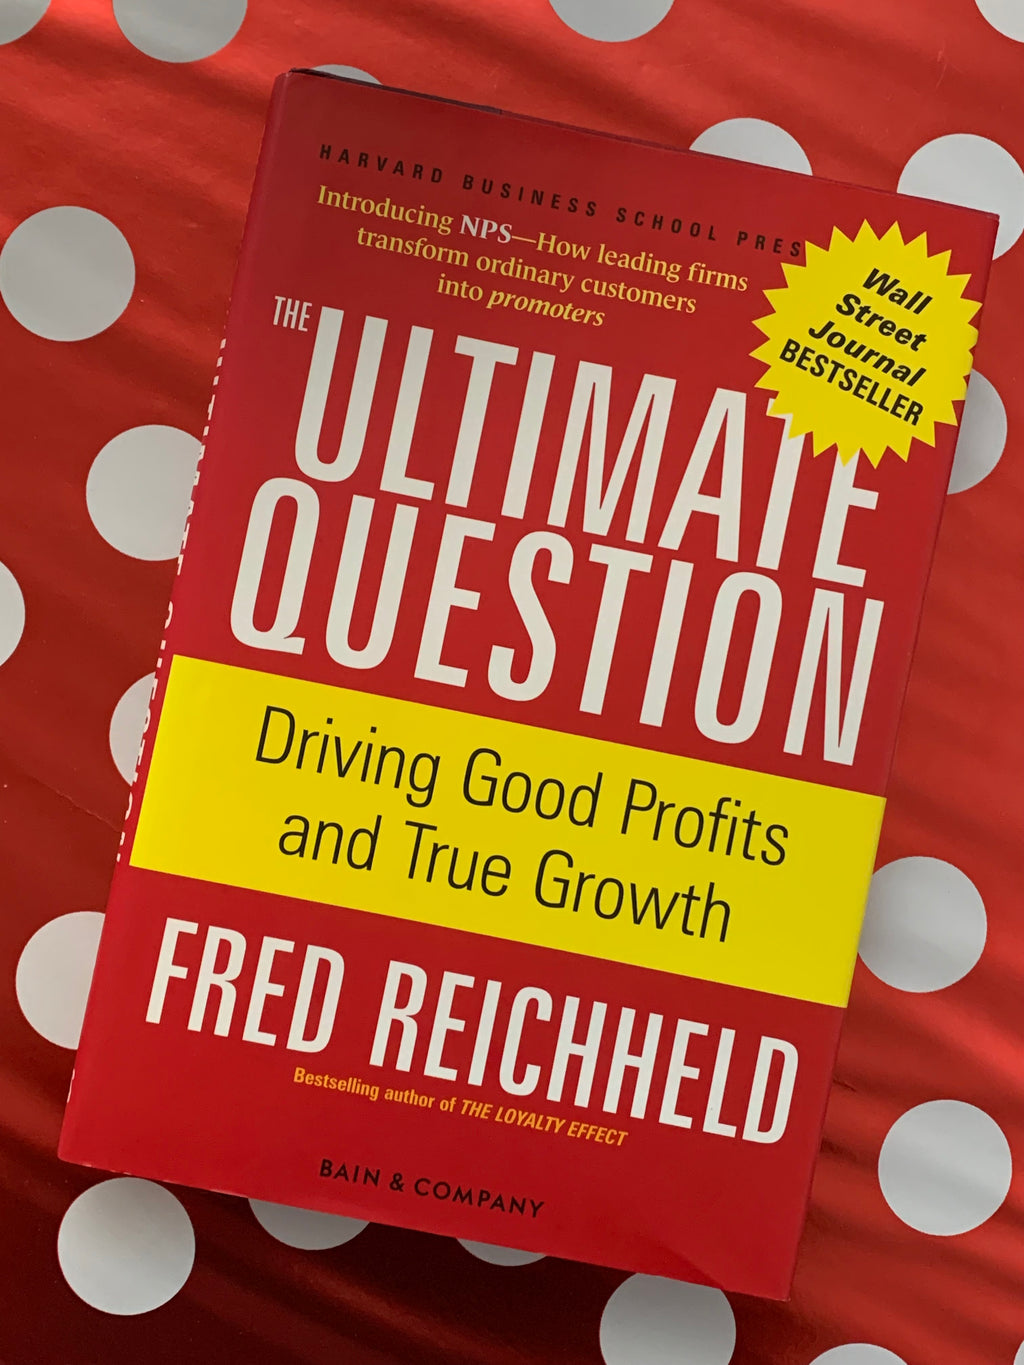 The Ultimate Question: Driving Good Profits and True Growth- By Fred Reichheld